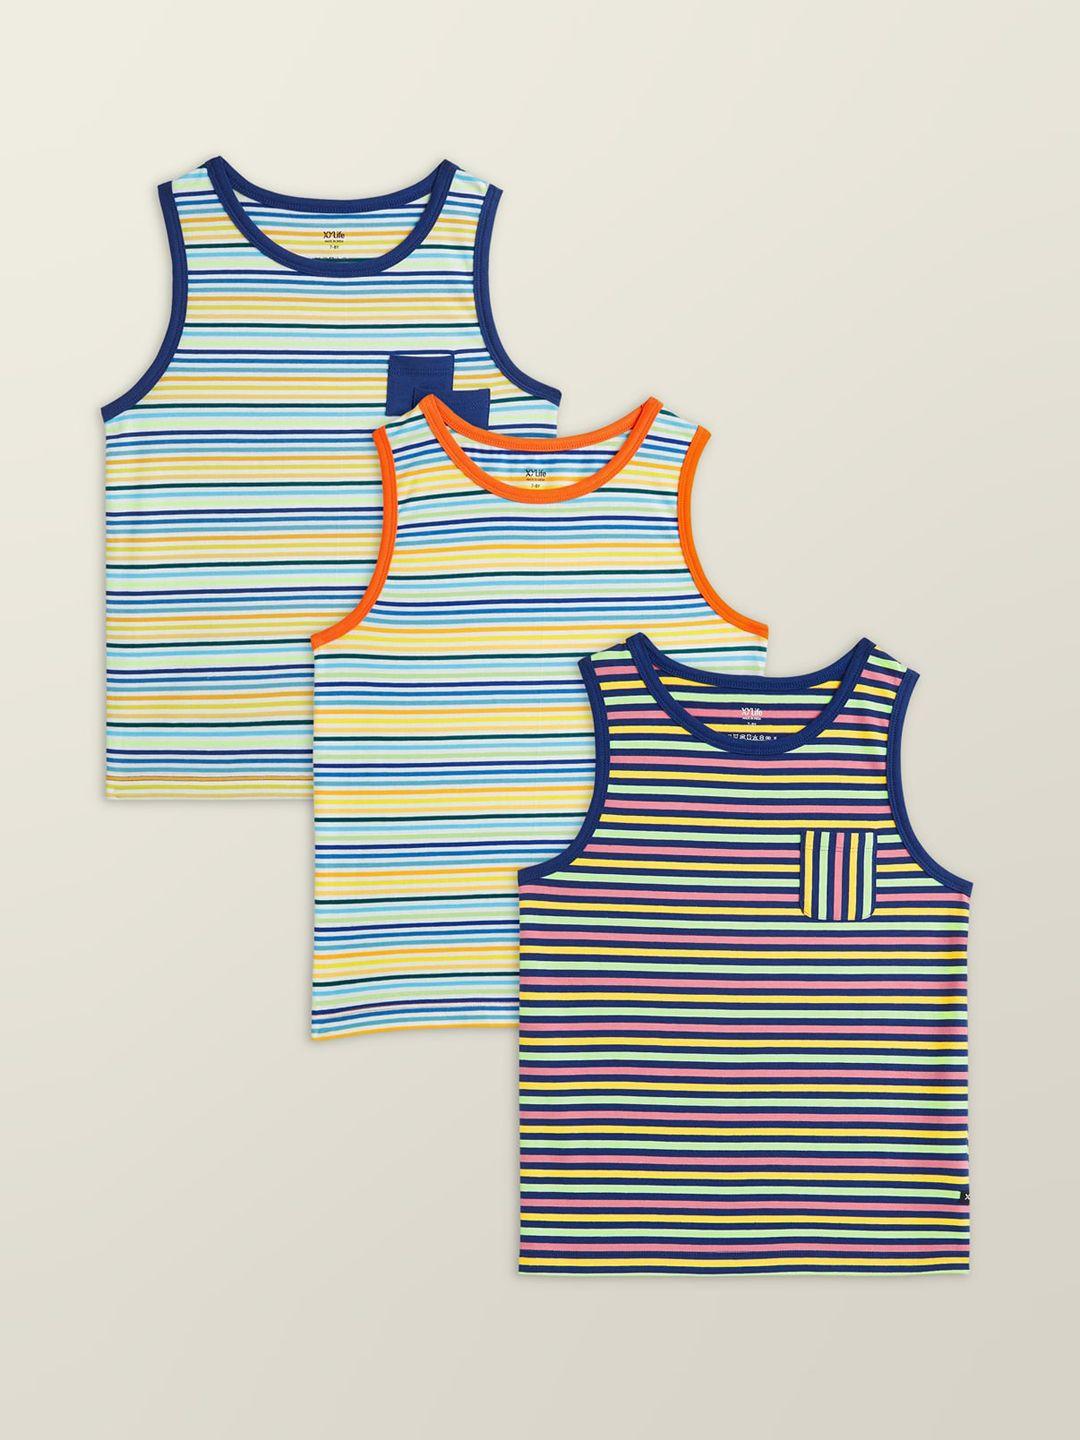 xy life boys pack of 3 striped combed cotton innerwear basic vests